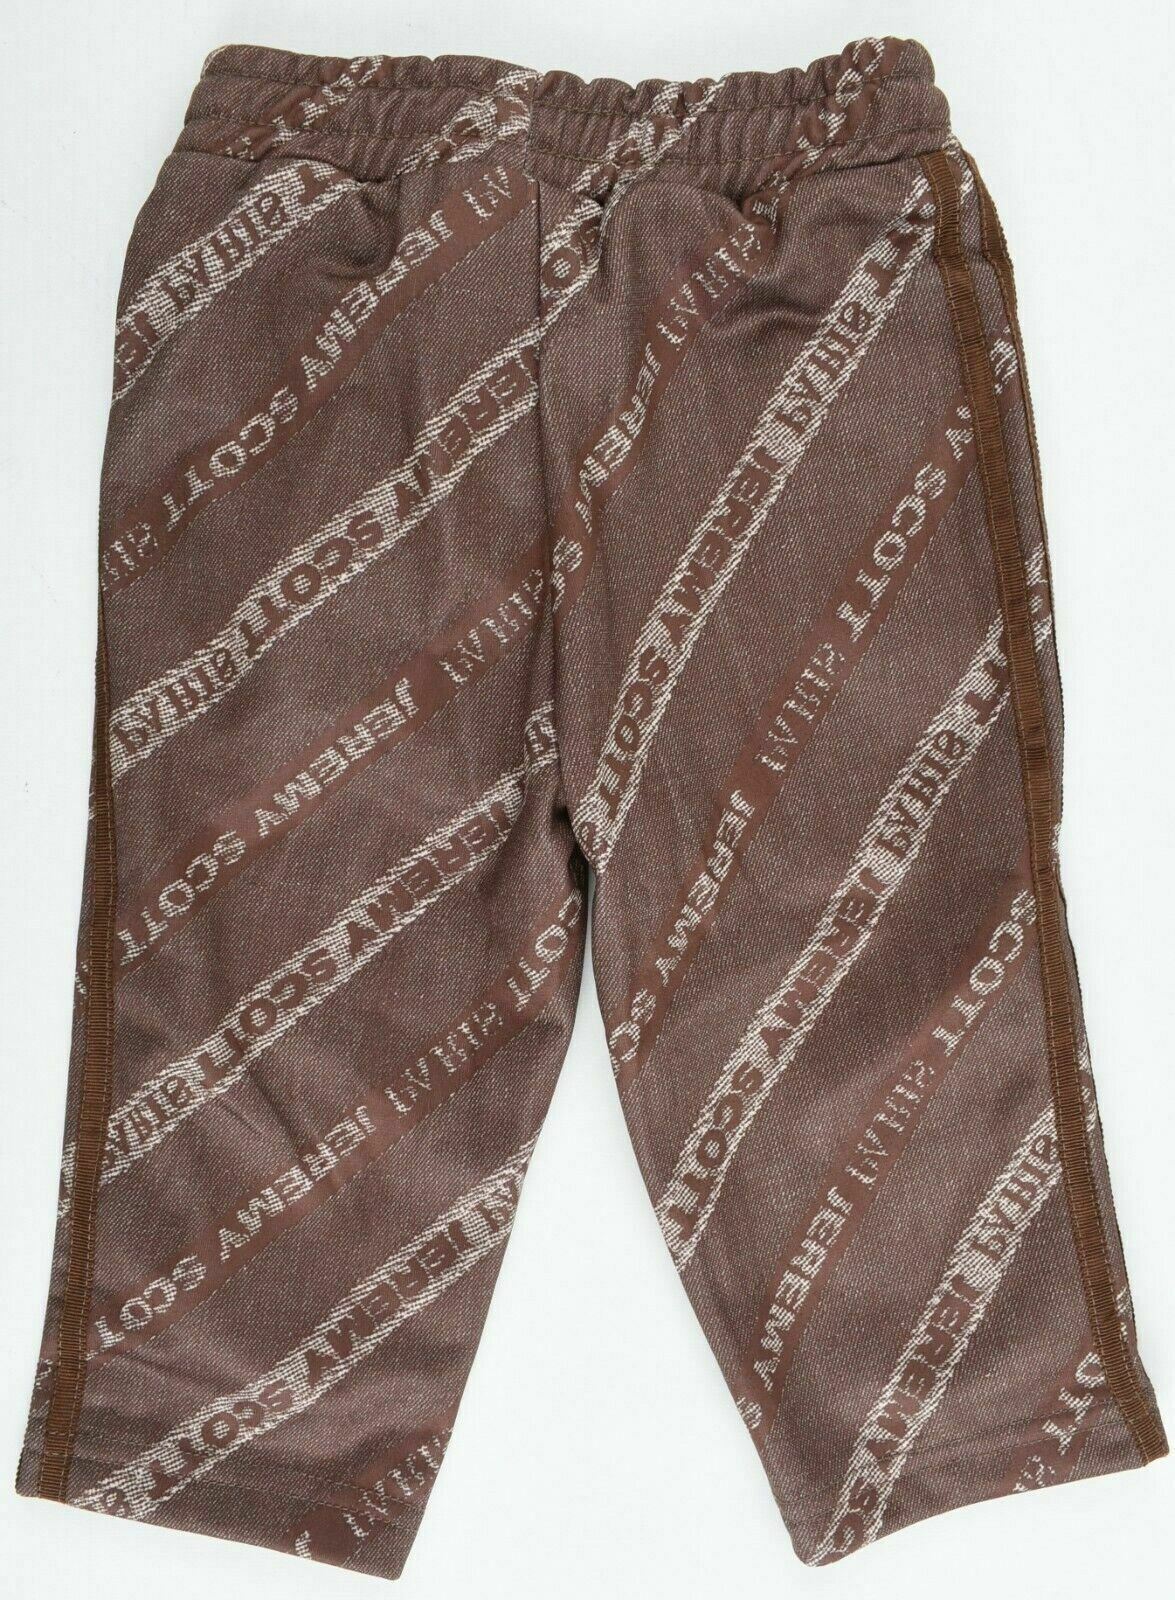 JEREMY SCOTT x ADIDAS Baby Boys Logo Joggers Trousers Brown, 6 m to 9 months